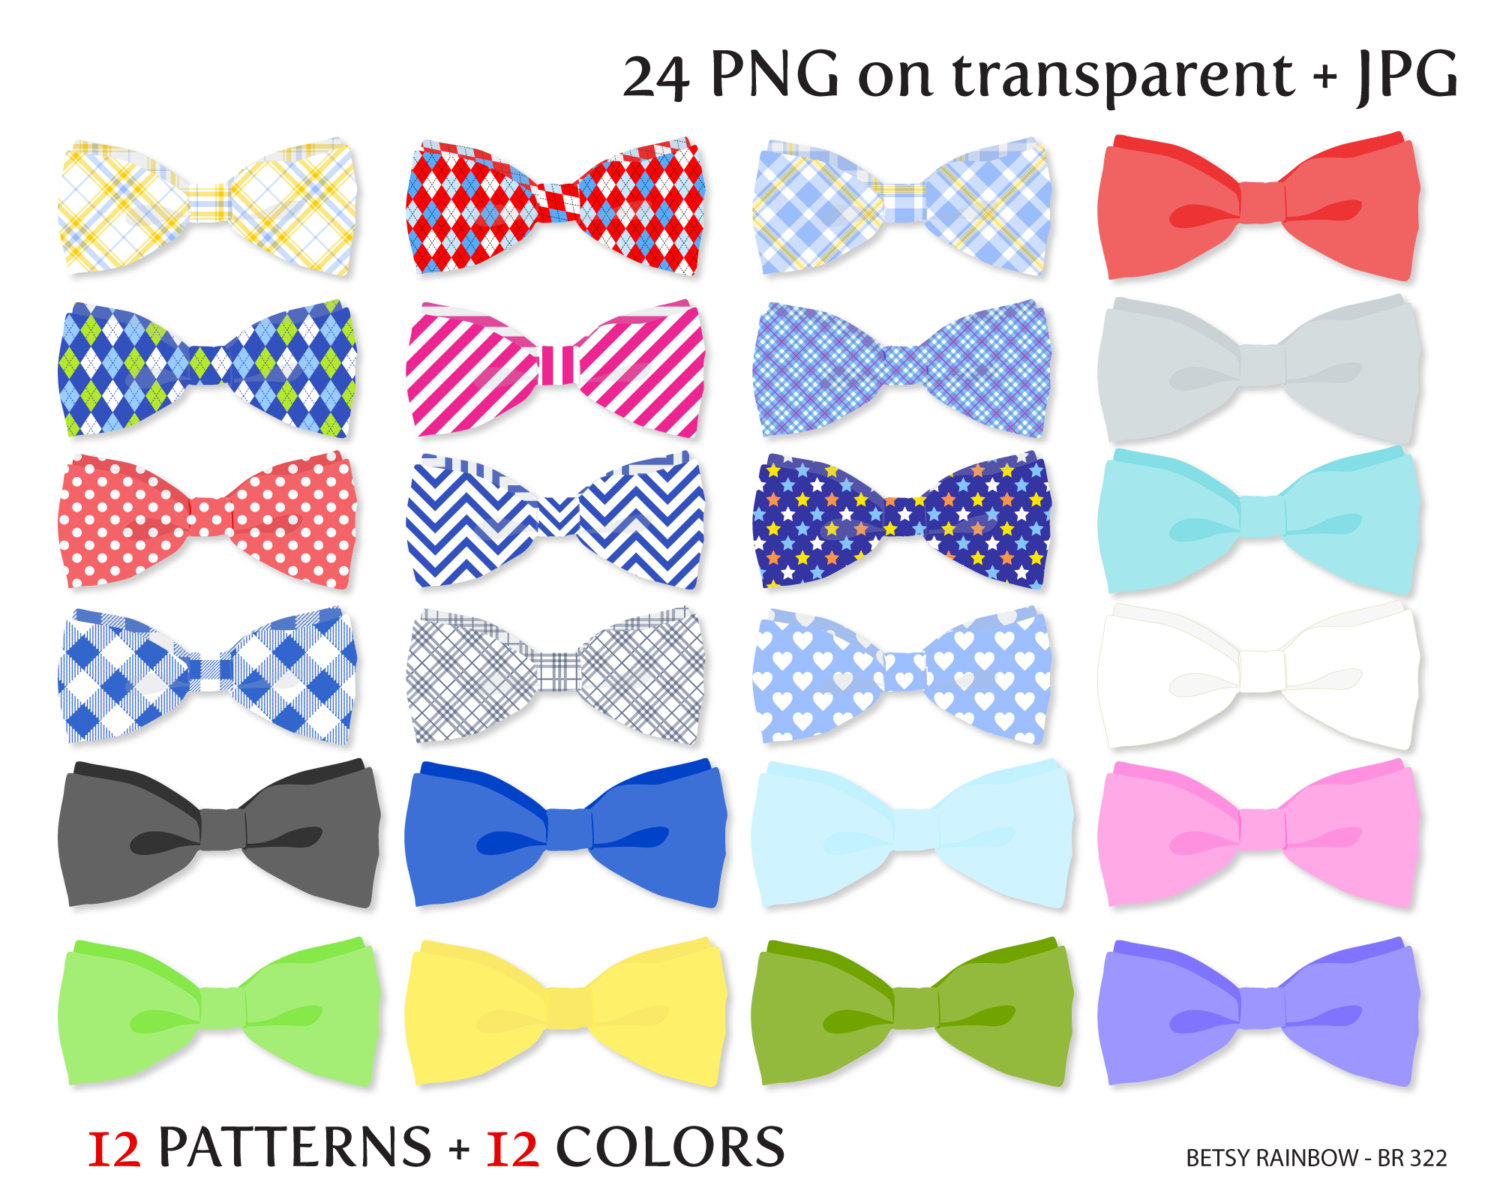 Bow tie clipart, PNG and JPG, neck bow tie clipart, neck bow, little man,  boy - BR 322